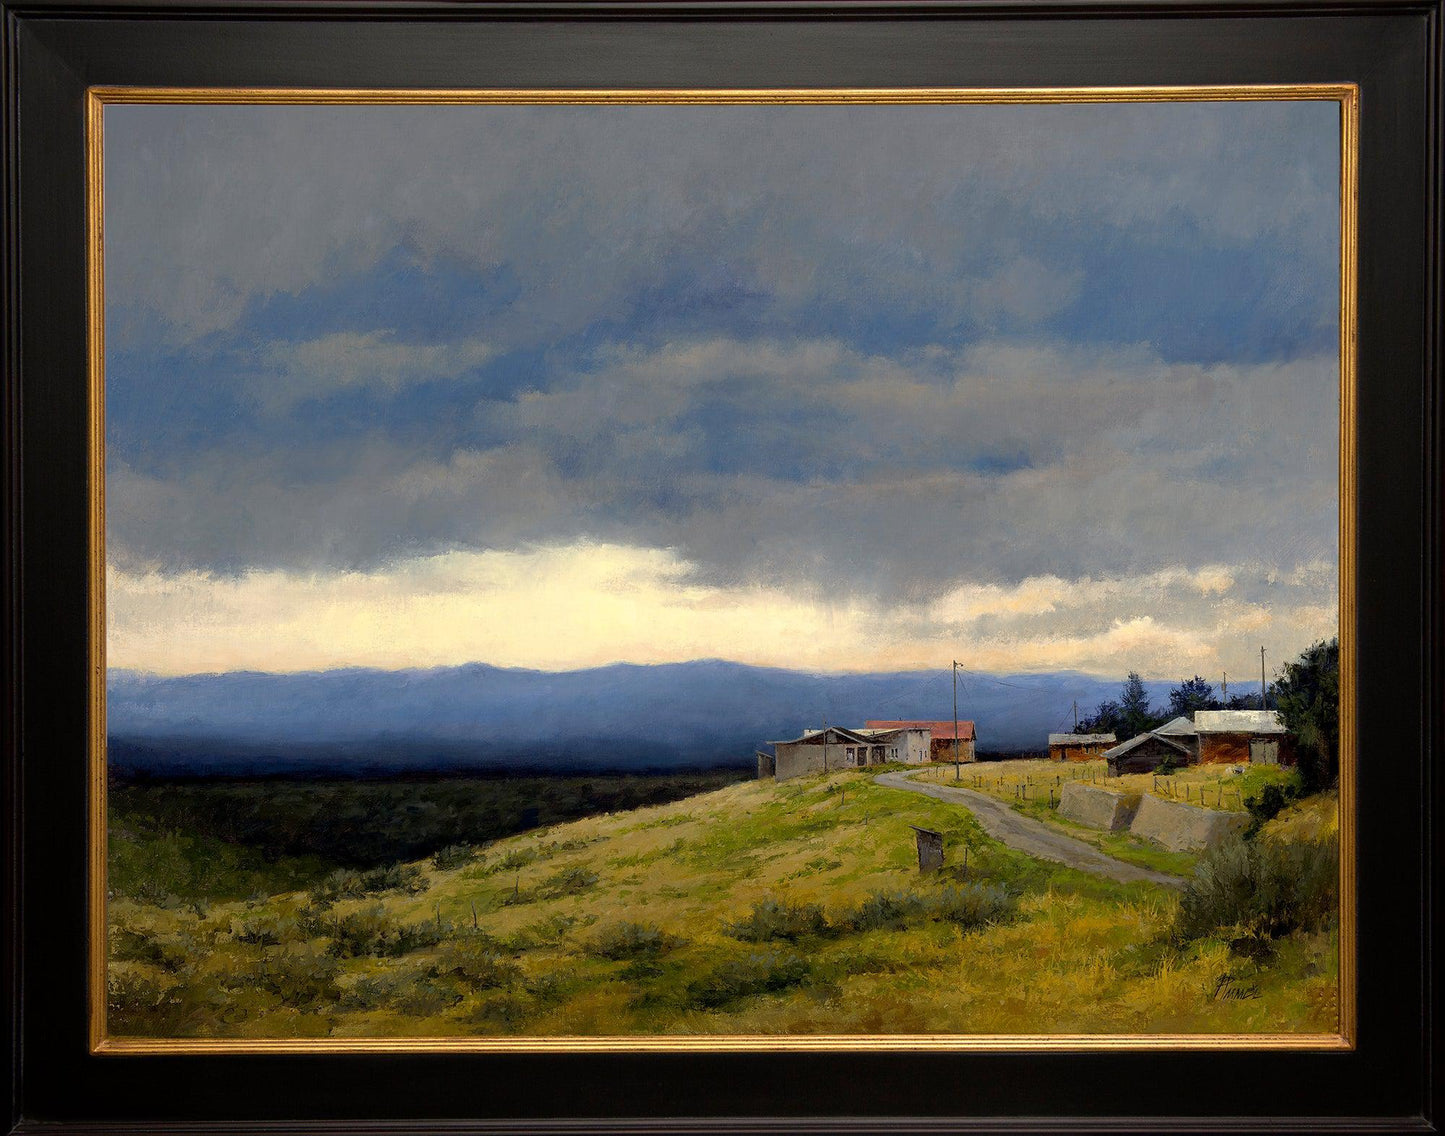 Storm Over Truchas-Painting-Peggy Immel-Sorrel Sky Gallery